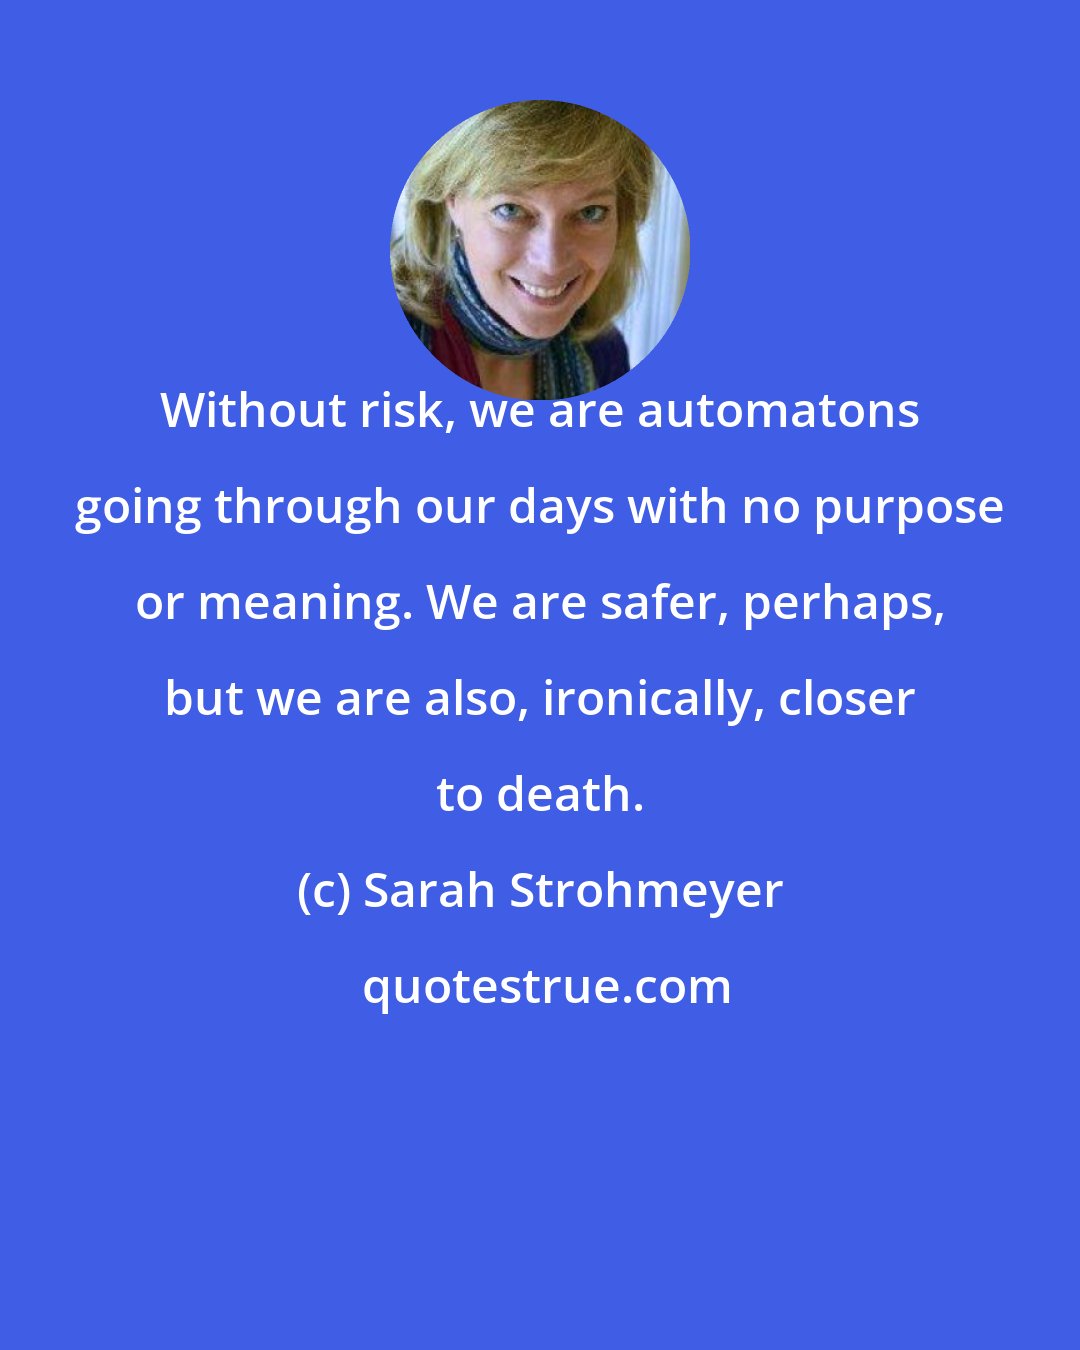 Sarah Strohmeyer: Without risk, we are automatons going through our days with no purpose or meaning. We are safer, perhaps, but we are also, ironically, closer to death.